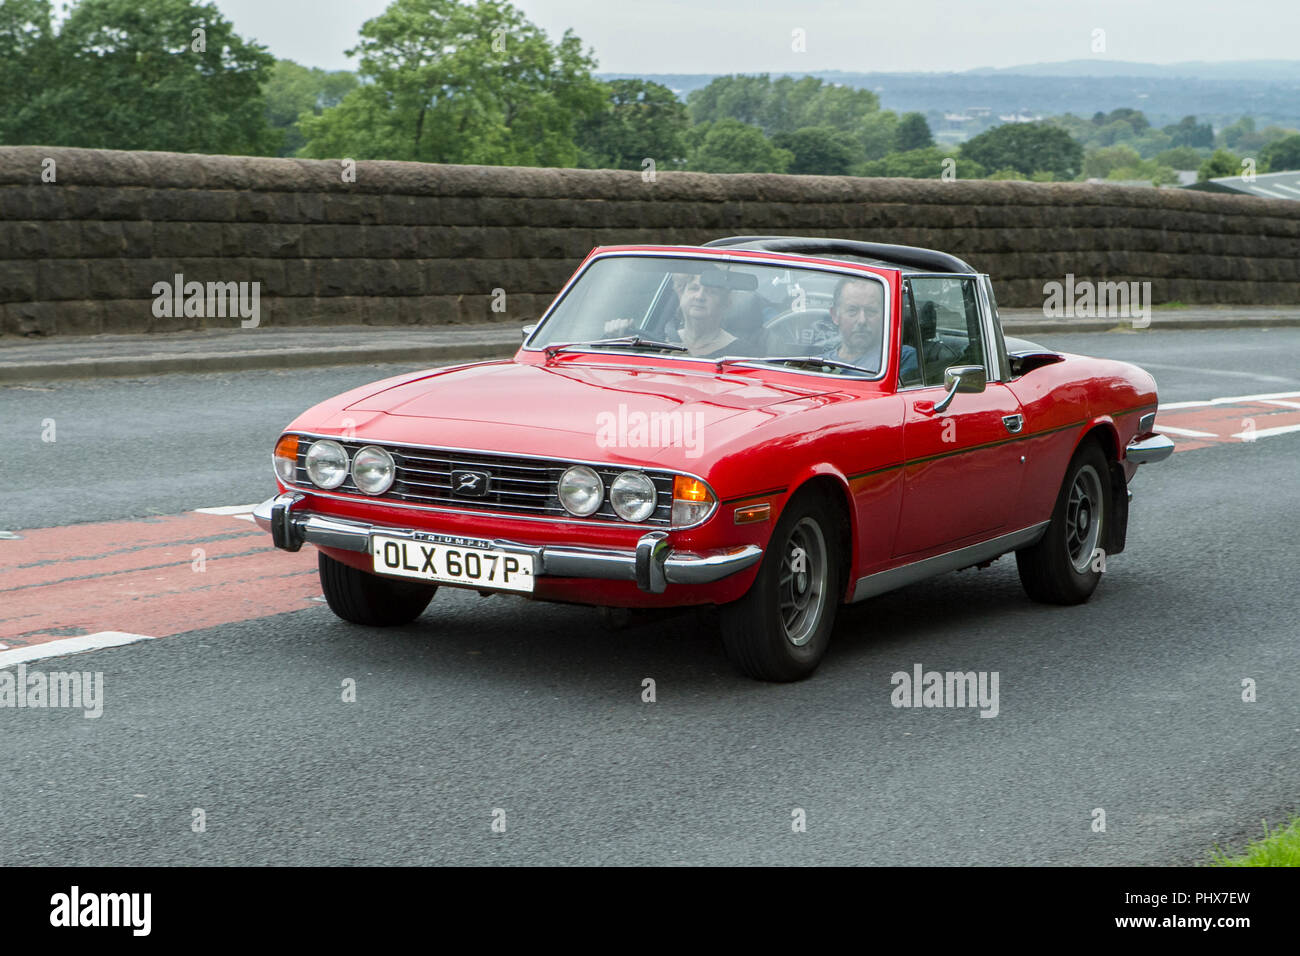 Red 975 Triumph Stag Auto at Hoghton towers annual classic vintage car rally, UK Stock Photo